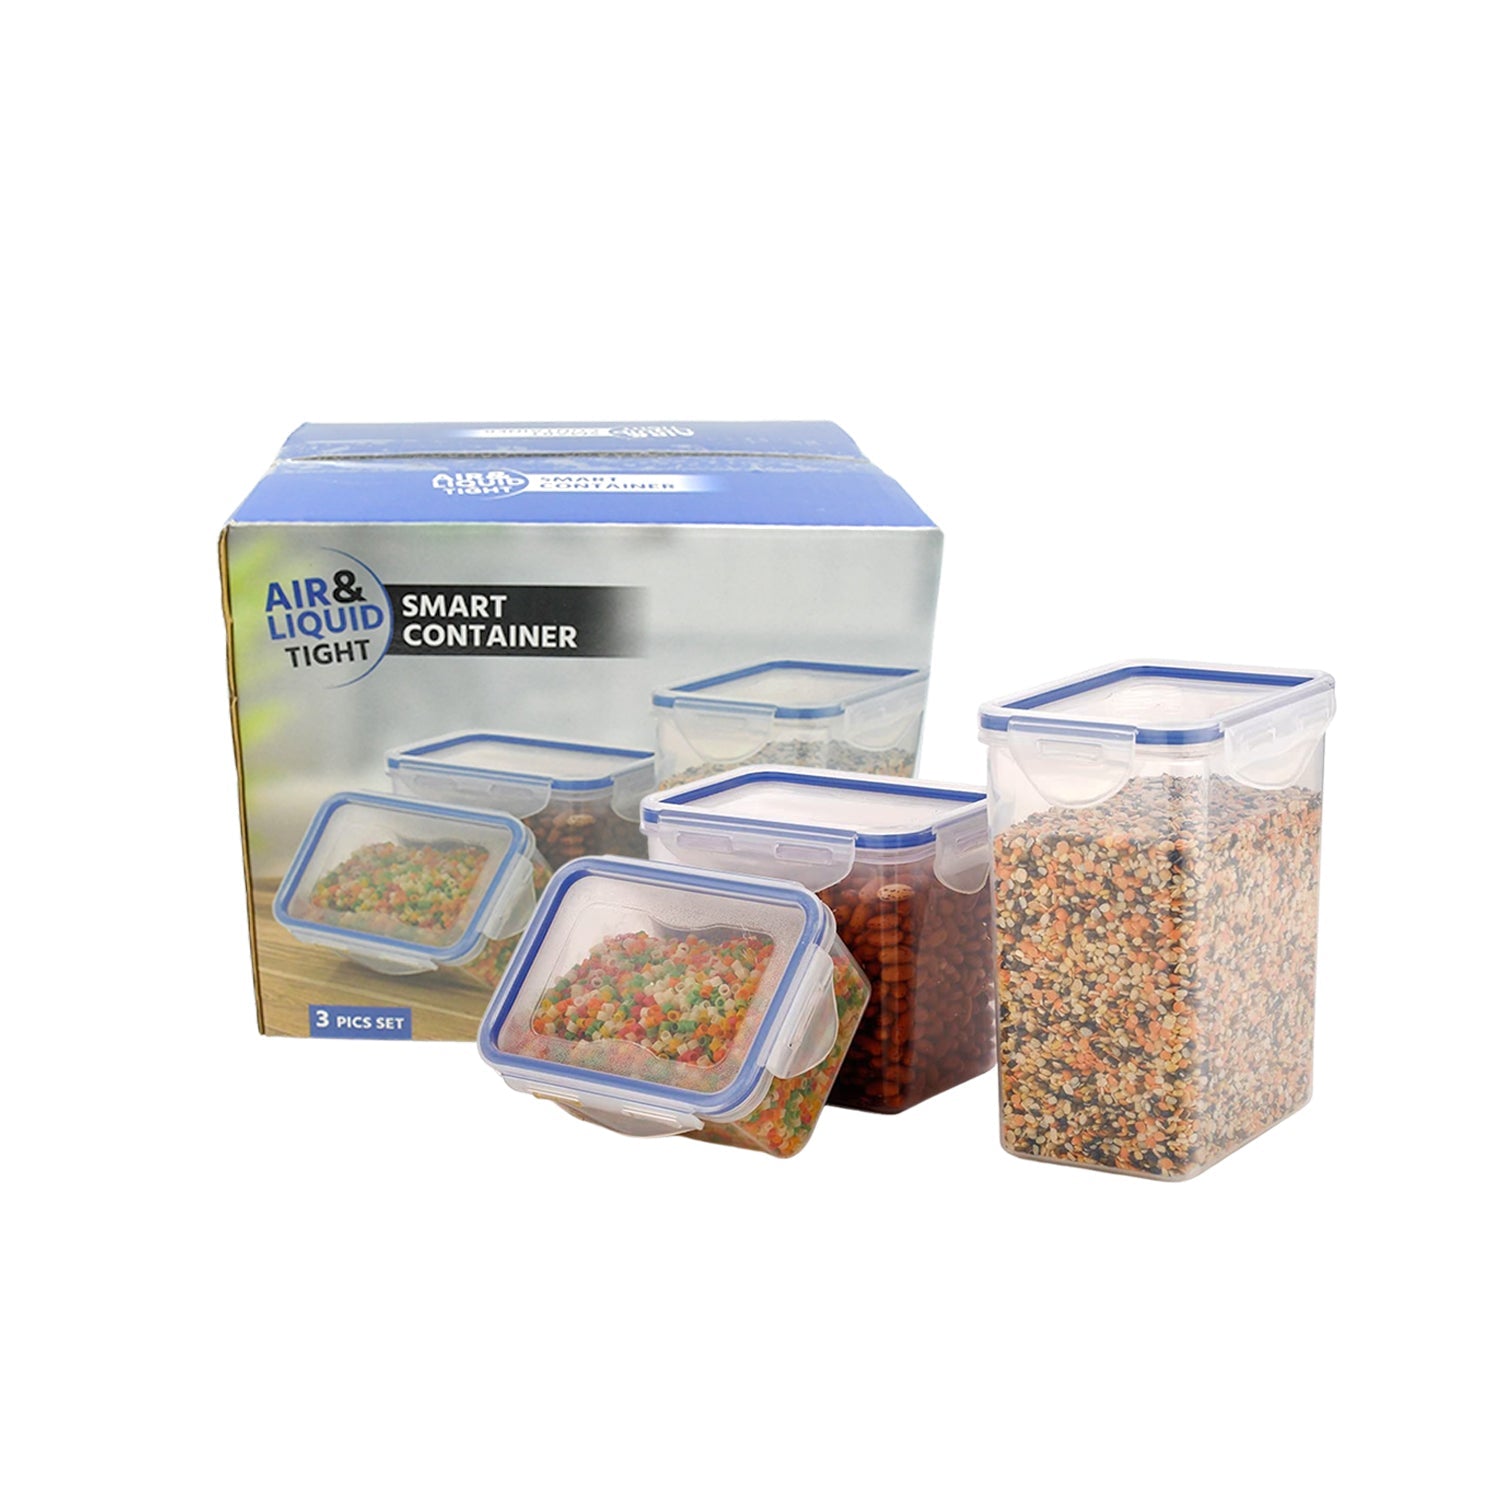 5800 Classics Rectangular Plastic Airtight Food Storage Containers with Leak Proof Locking Lid Storage container set of 3 Pc( Approx Capacity 500ml,1000ml,1500ml, Transparent)